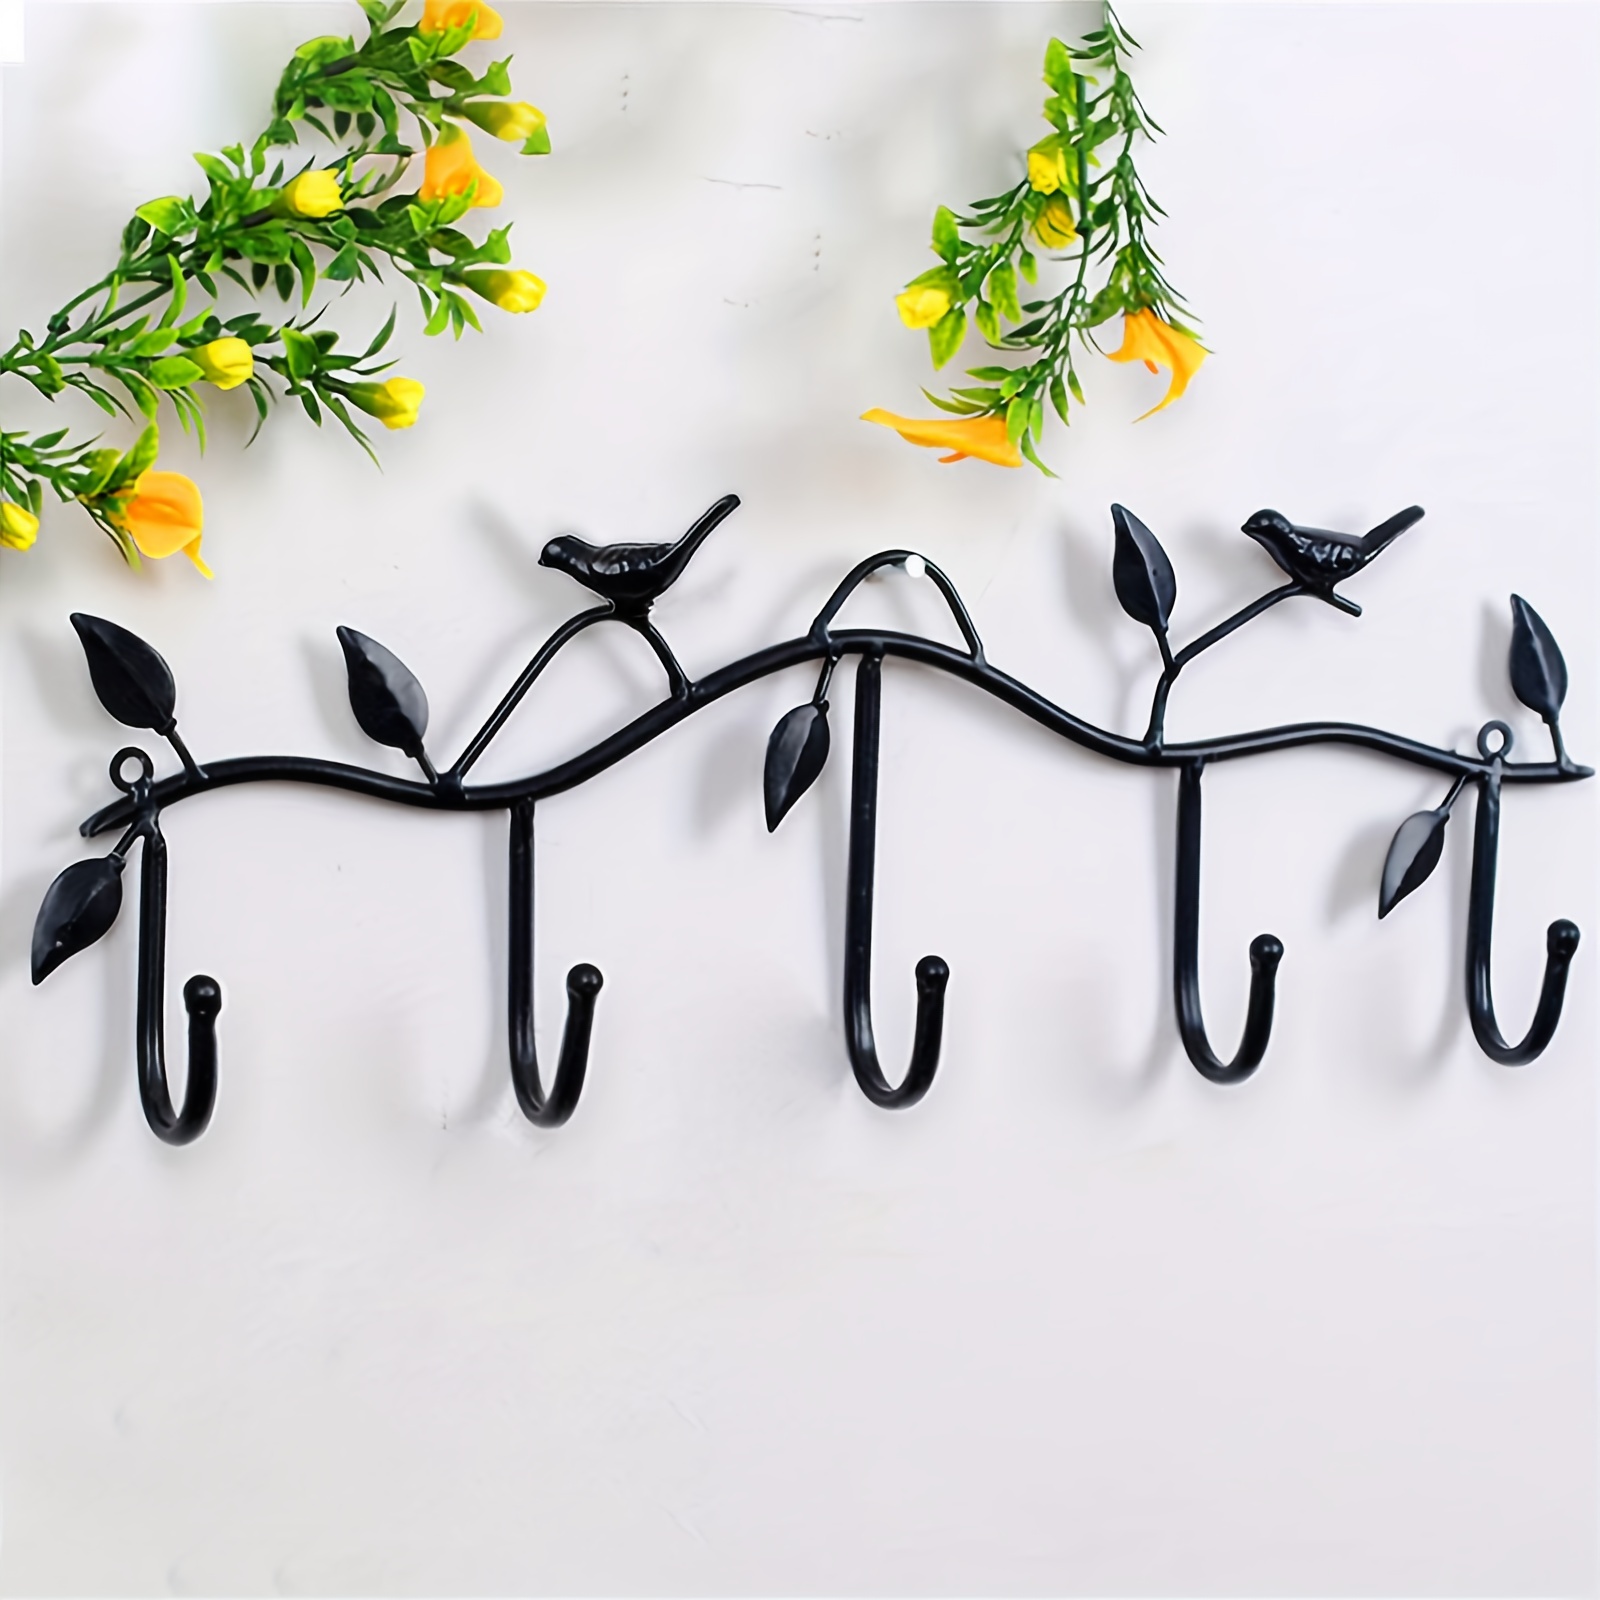 Decorative Wall Hook Wall Sticky For Hanging Wall Organizer With Hooks Hat  Bag Hooks Curtain Decoration Wall Hanging Hooks For - Key & Decorative  Hooks - AliExpress